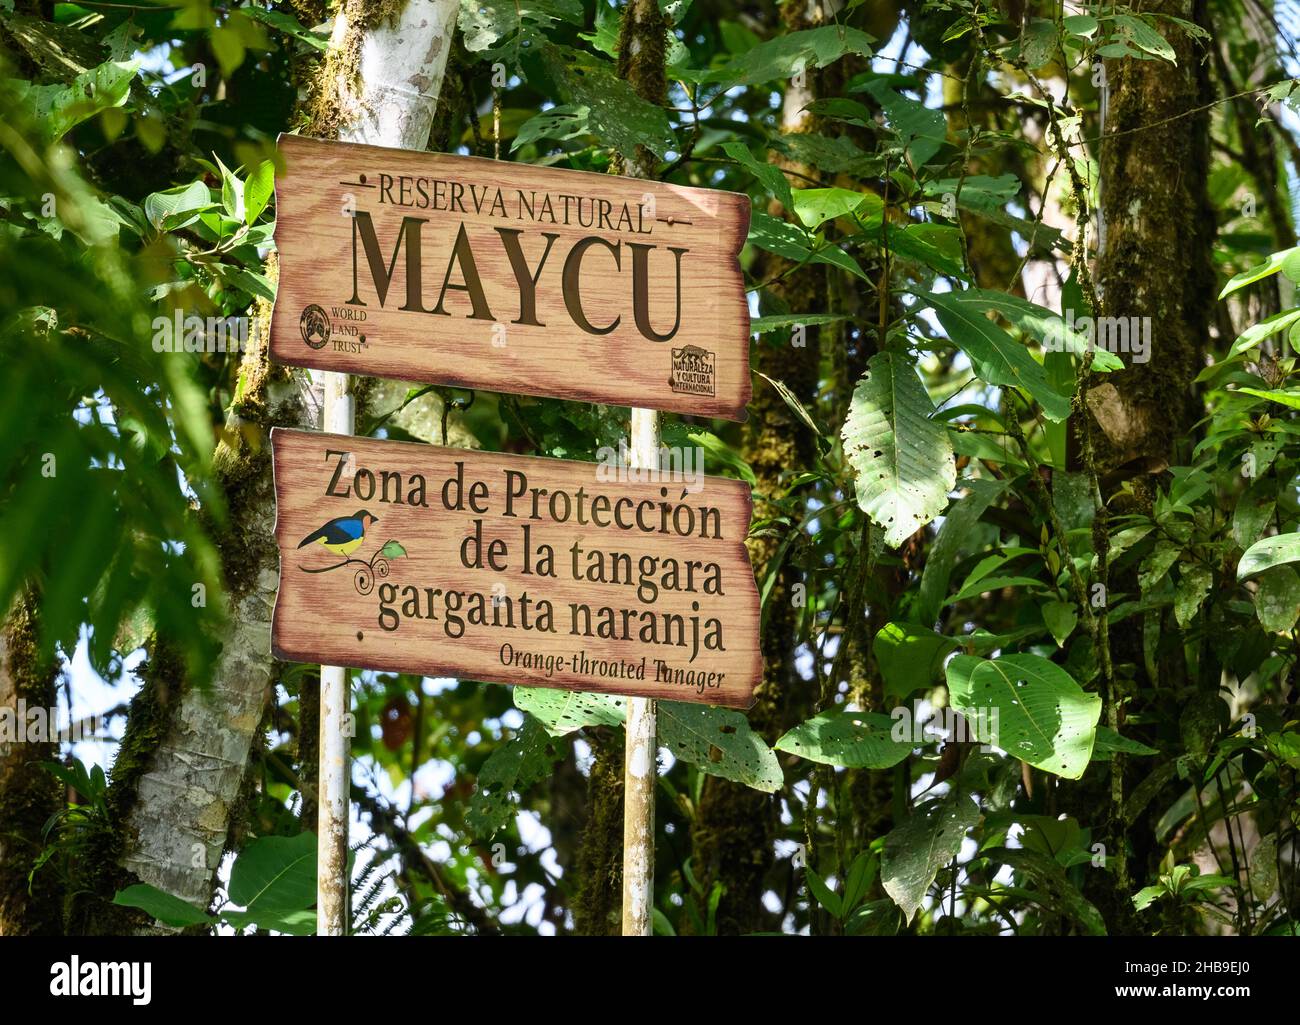 Sign of Maycu Natural Reserve, a protected area for Orange-throated Tanager (Wetmorethraupis sterrhopteron). Zamora-Chinchipe, Ecuador, South America. Stock Photo